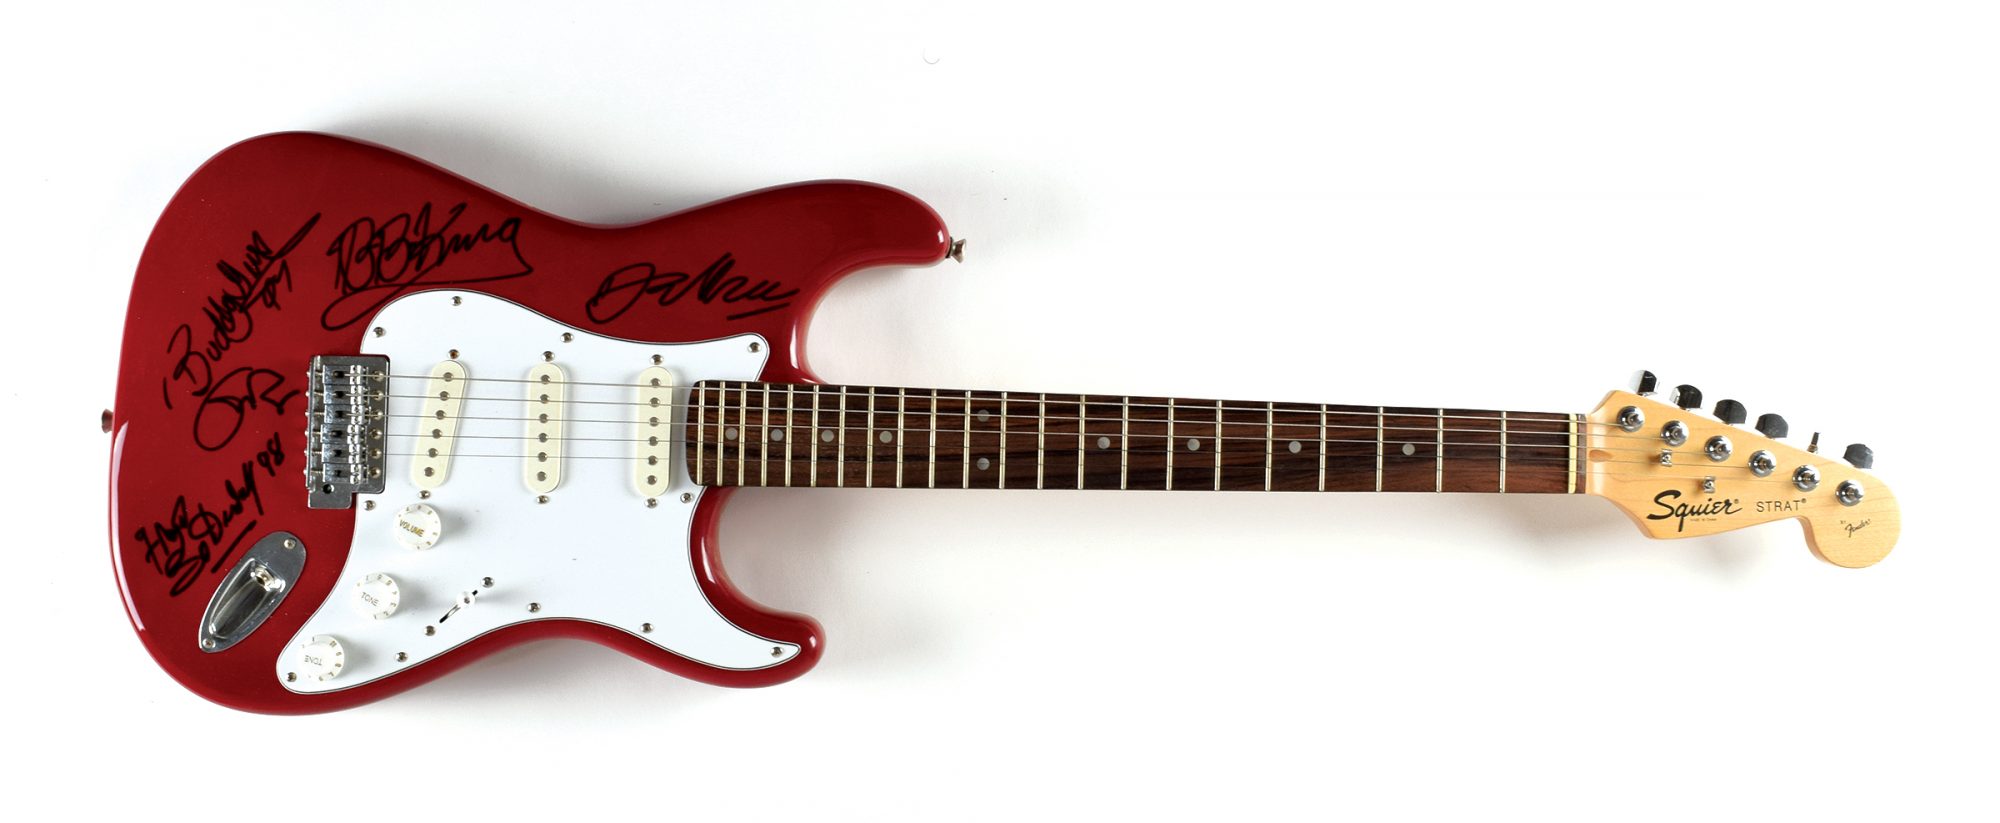 Stratocaster autographed by Eric Clapton Jeff Beck BB King Buddy Guy Bo Diddley John Brennan Collection RR Auction